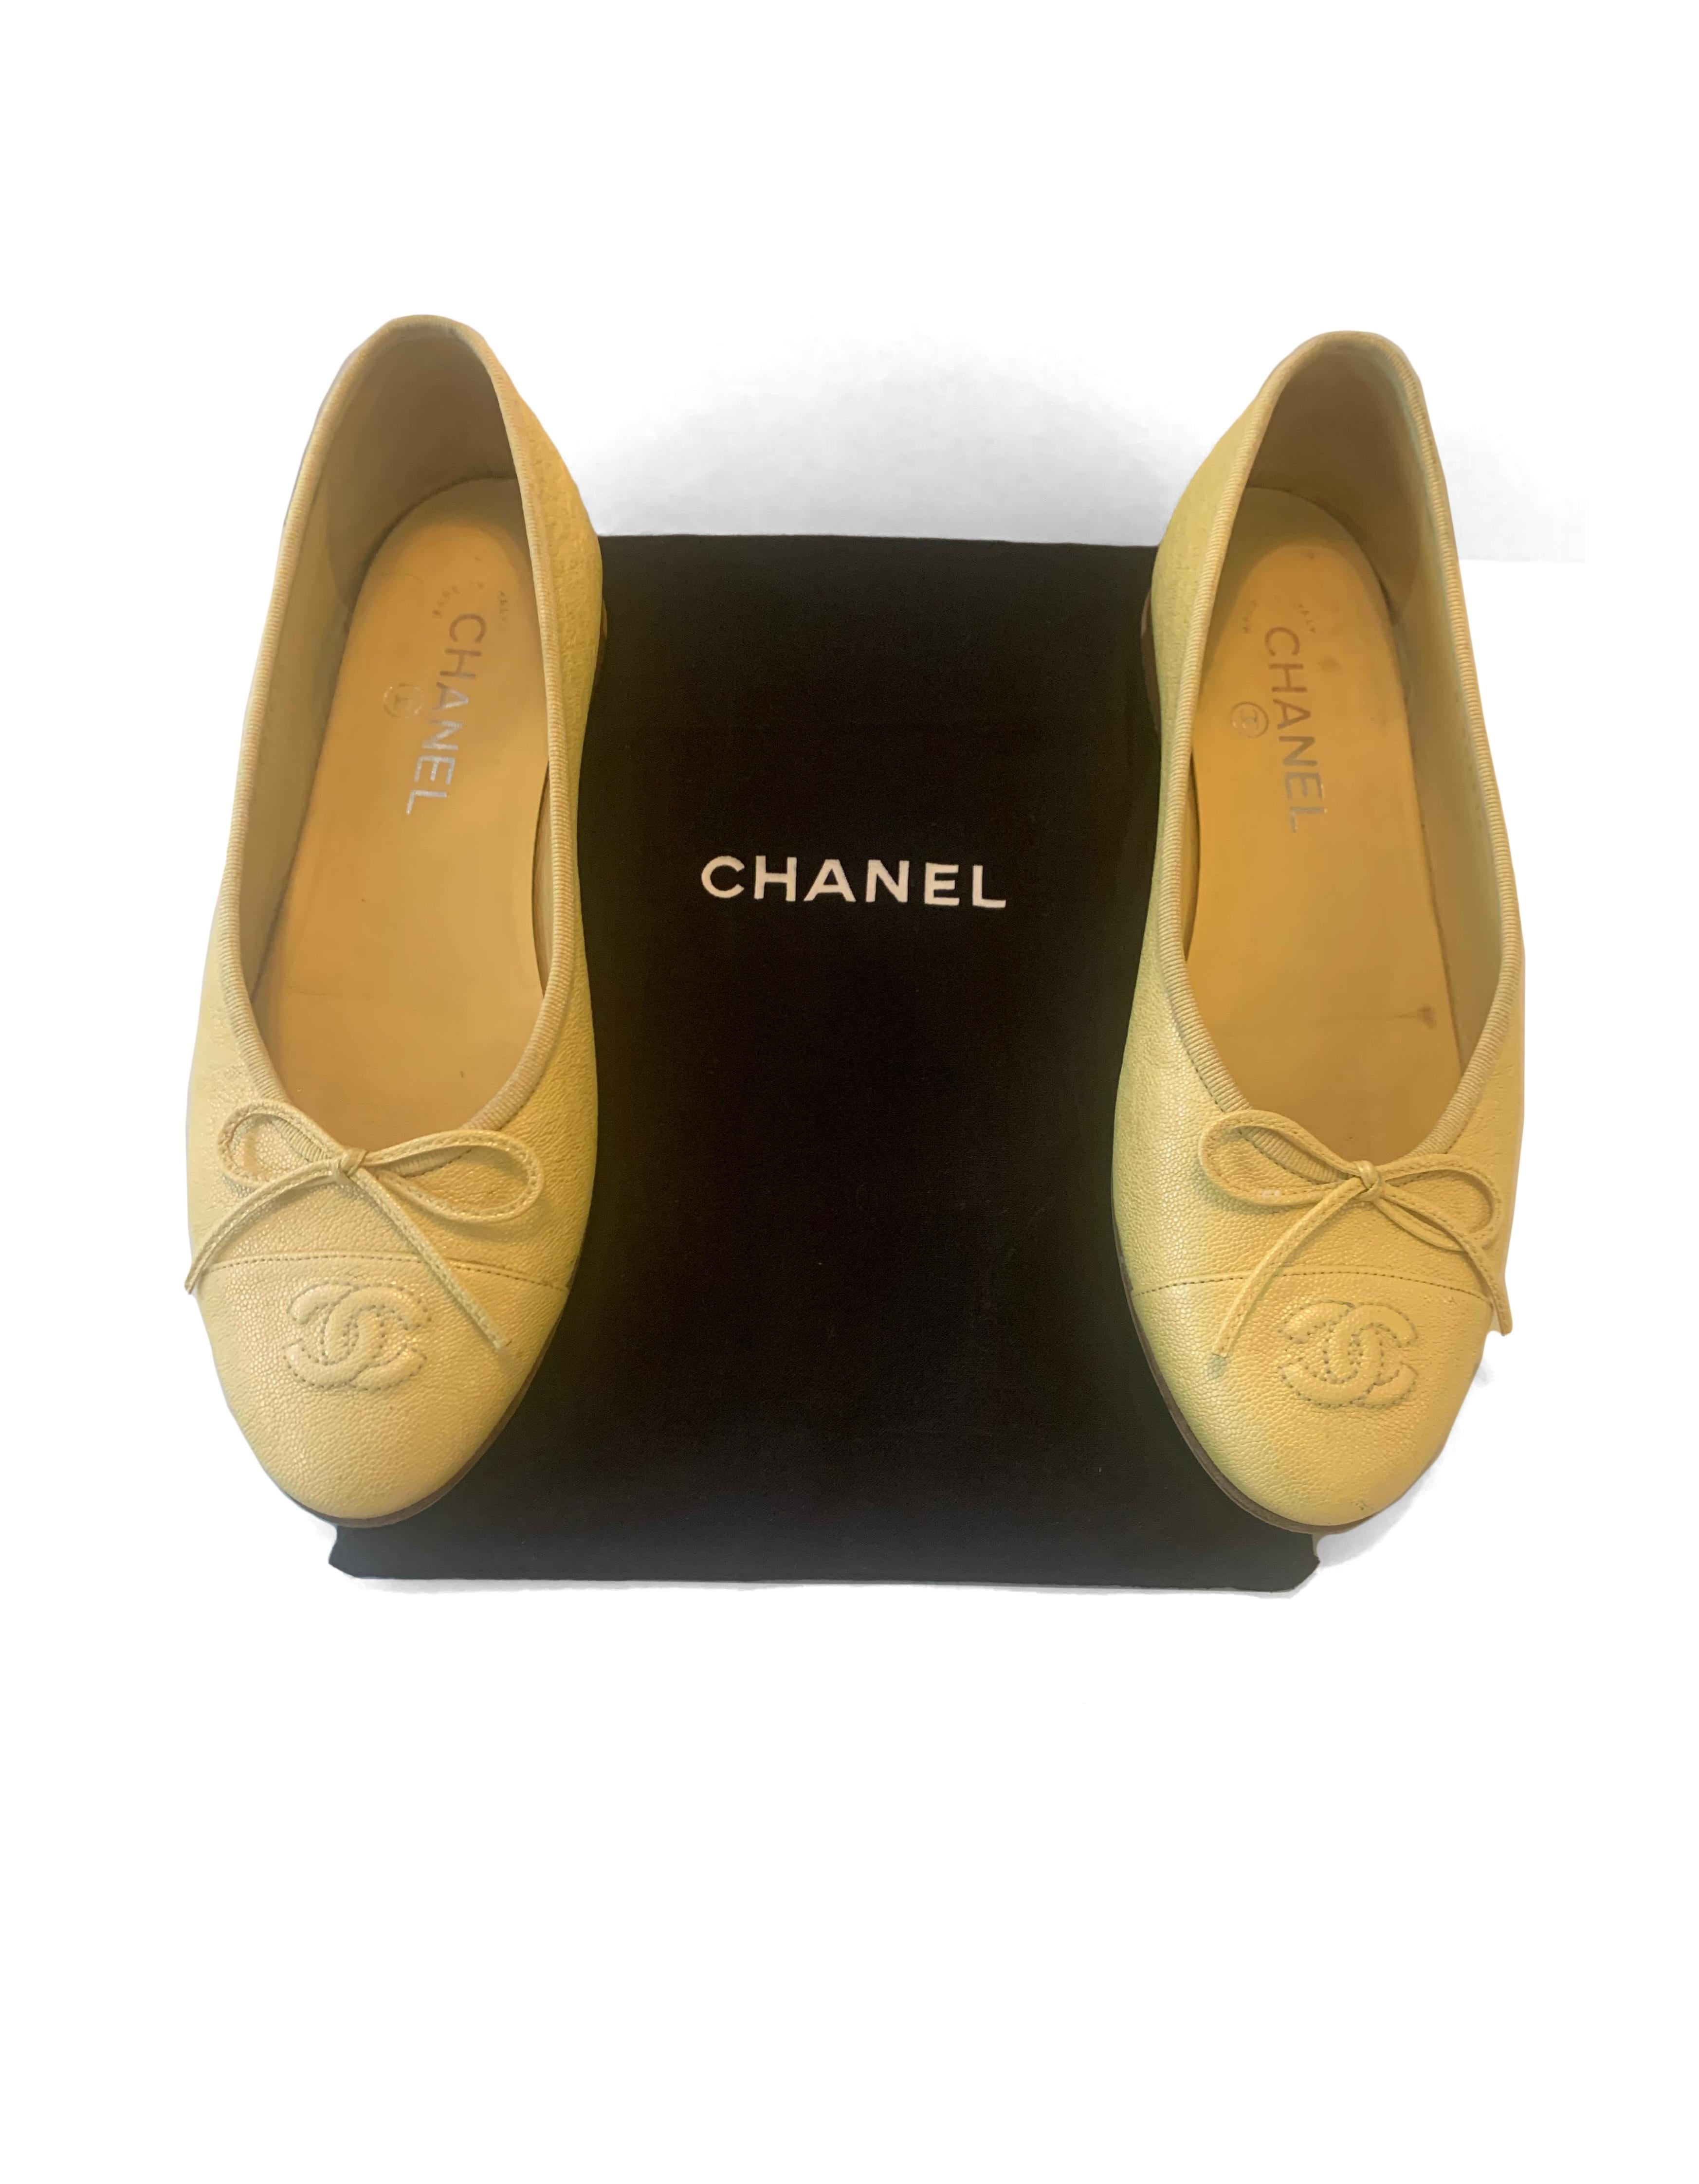 Chanel 2019 Iridescent Yellow CC Cap Toe Ballet Flats sz 39

Made In: Italy
Year of Production: 2019
Color: Iridescent yellow
Materials: Caviar leather
Closure/Opening: Slide on
Overall Condition: Very good pre-owned condition.  Scuffing throughout